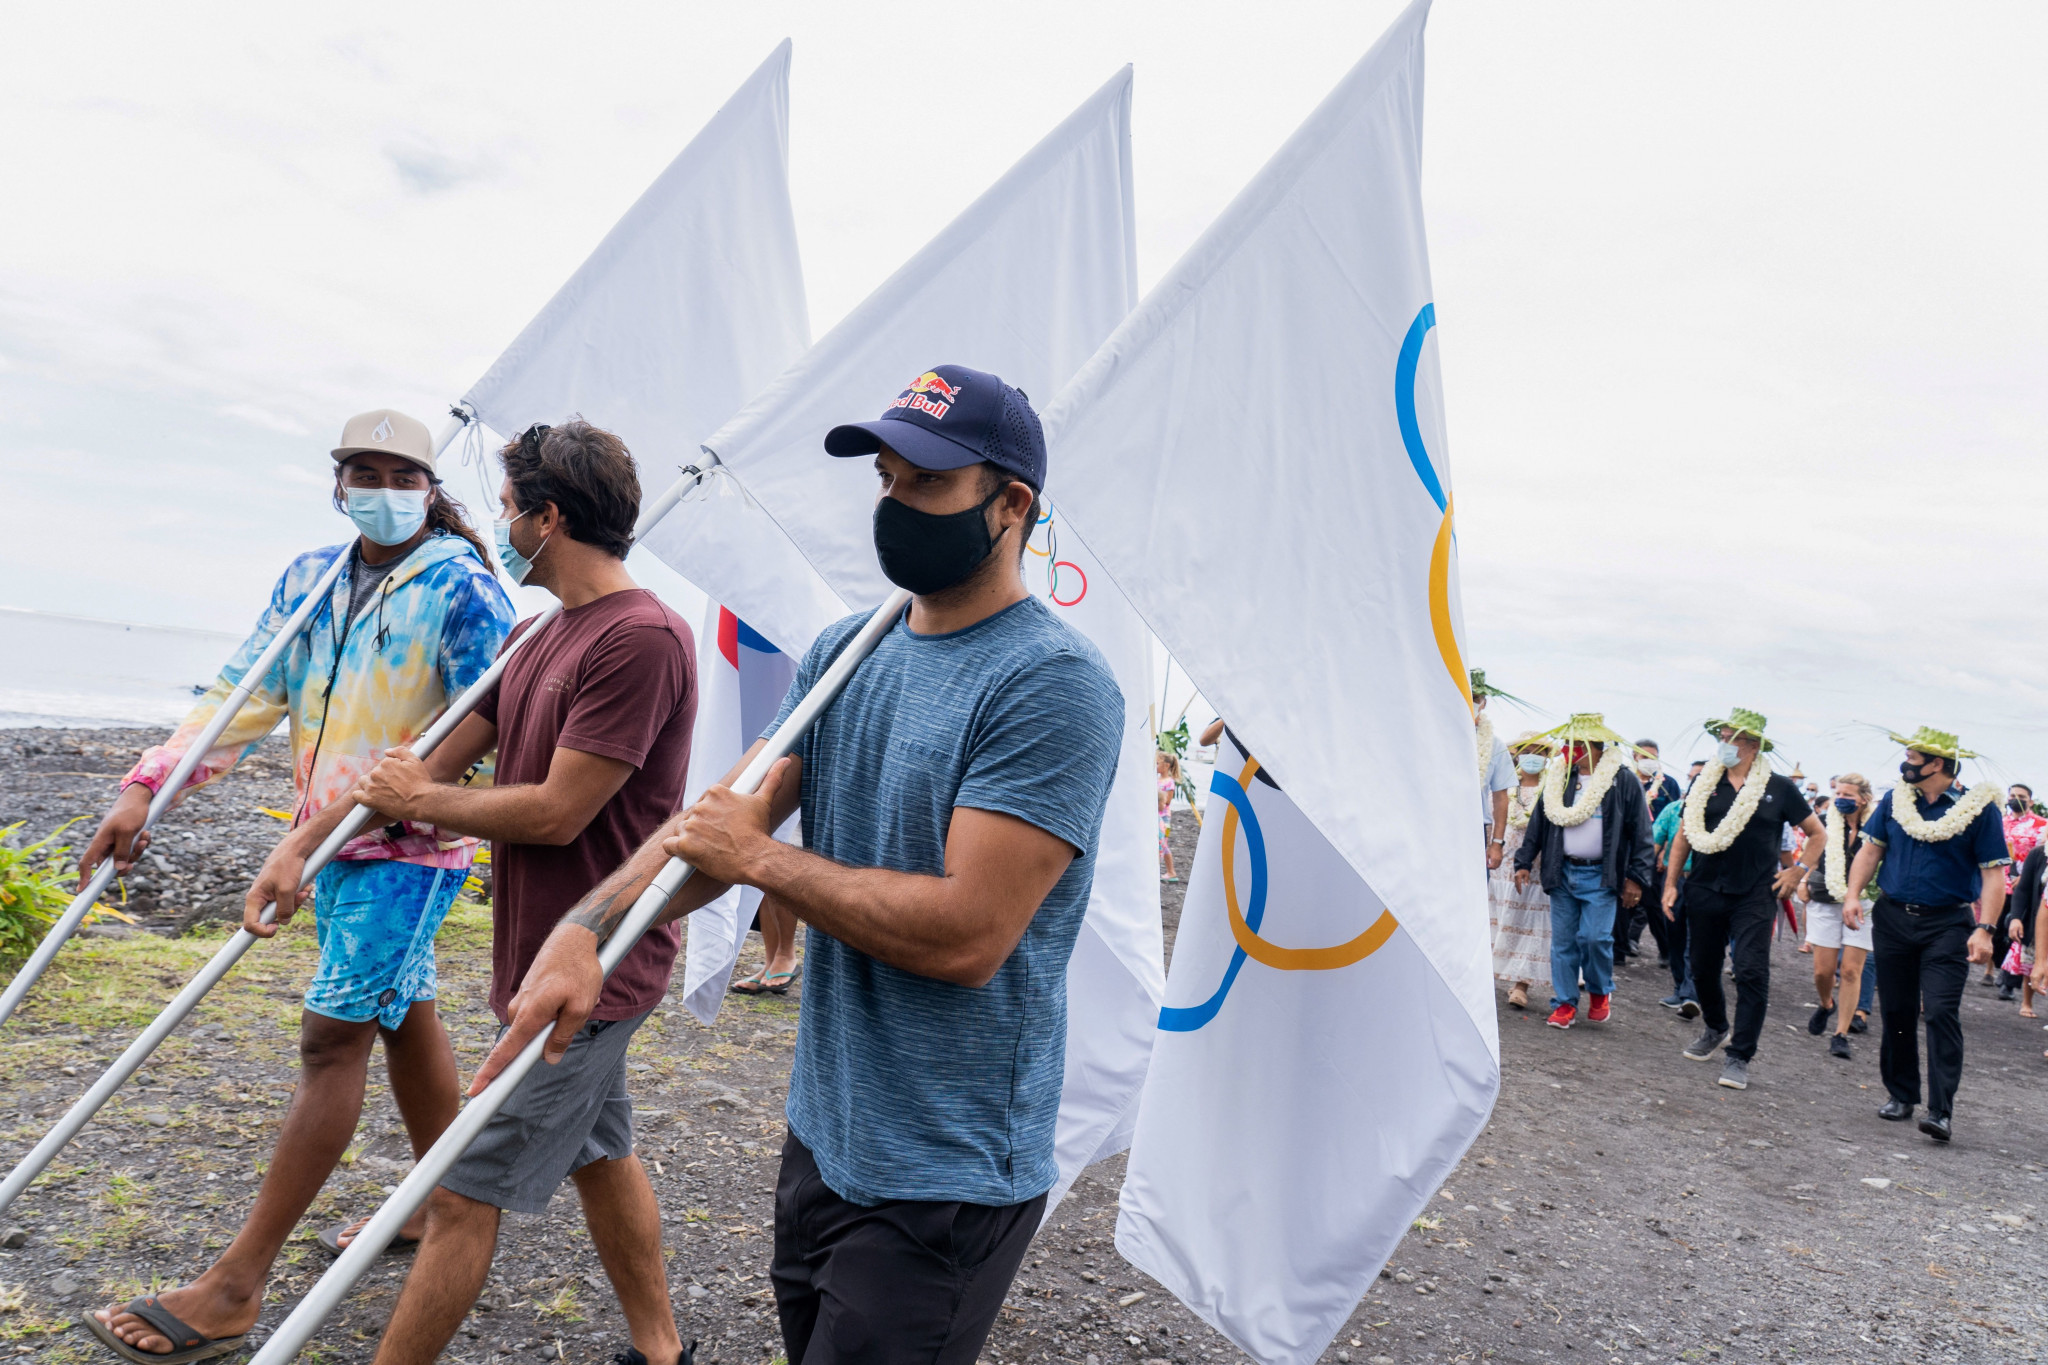 French Surfing Federation prepares surfers for Paris 2024 Olympics at course in Tahiti 